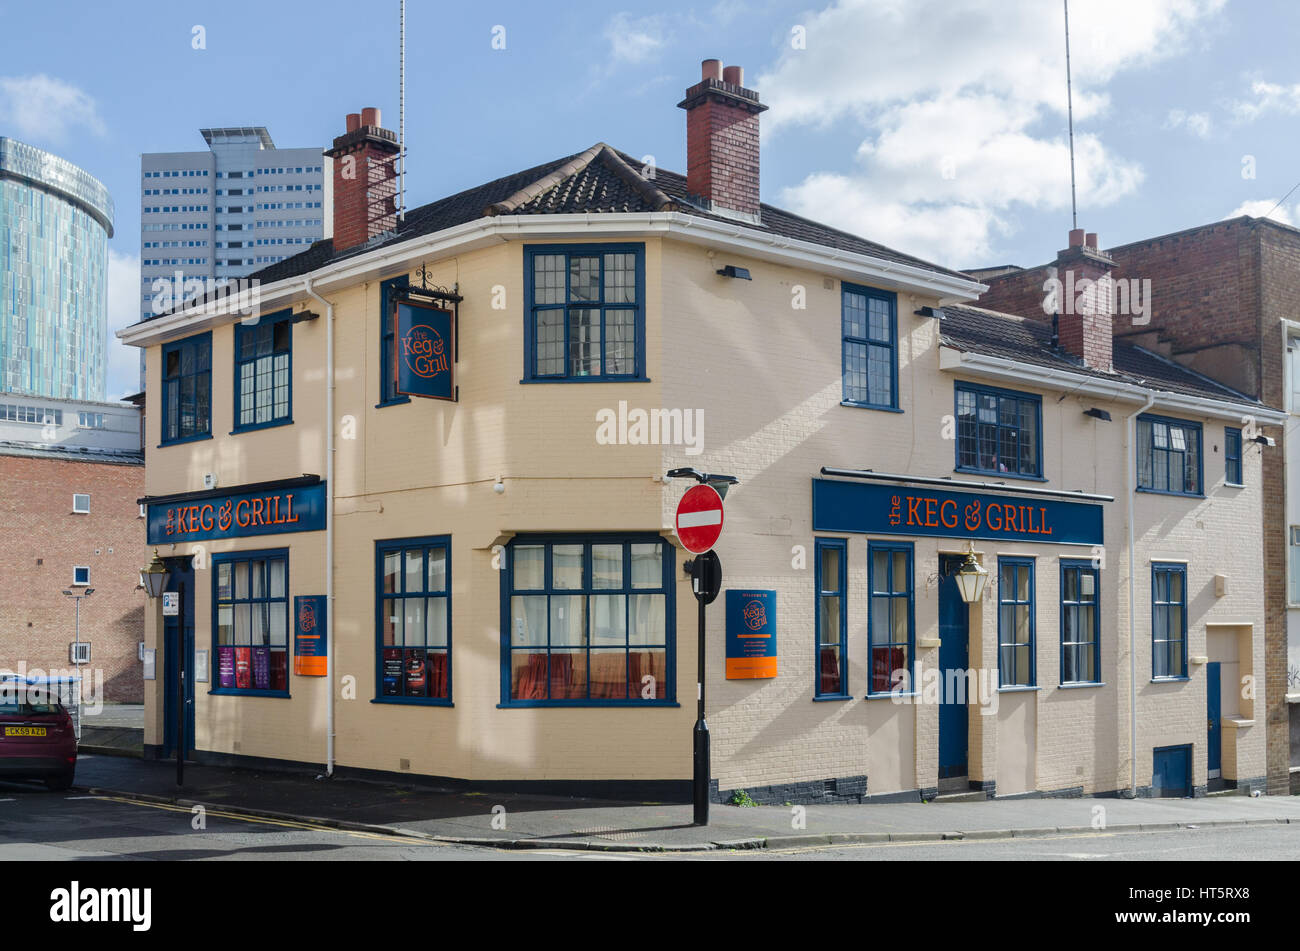 The Keg and Grill pub in Birmingham which serves beer and curry Stock Photo